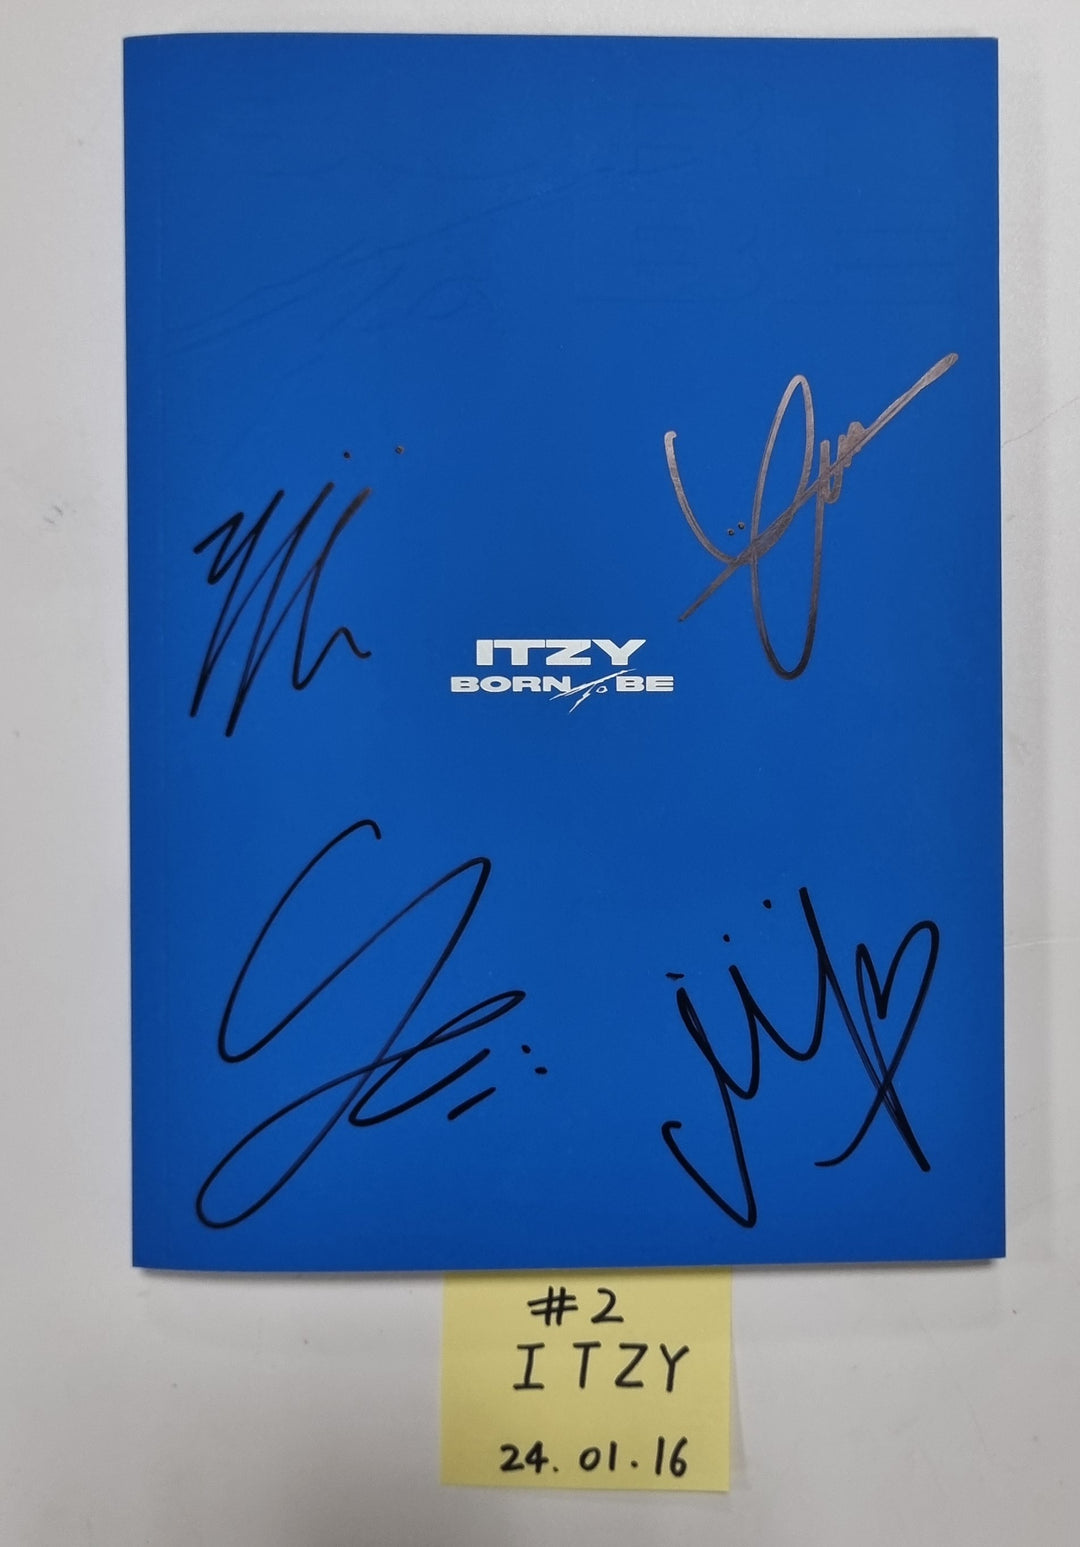 ITZY "BORN TO BE" - Hand Autographed(Signed) Promo Album [24.1.16]